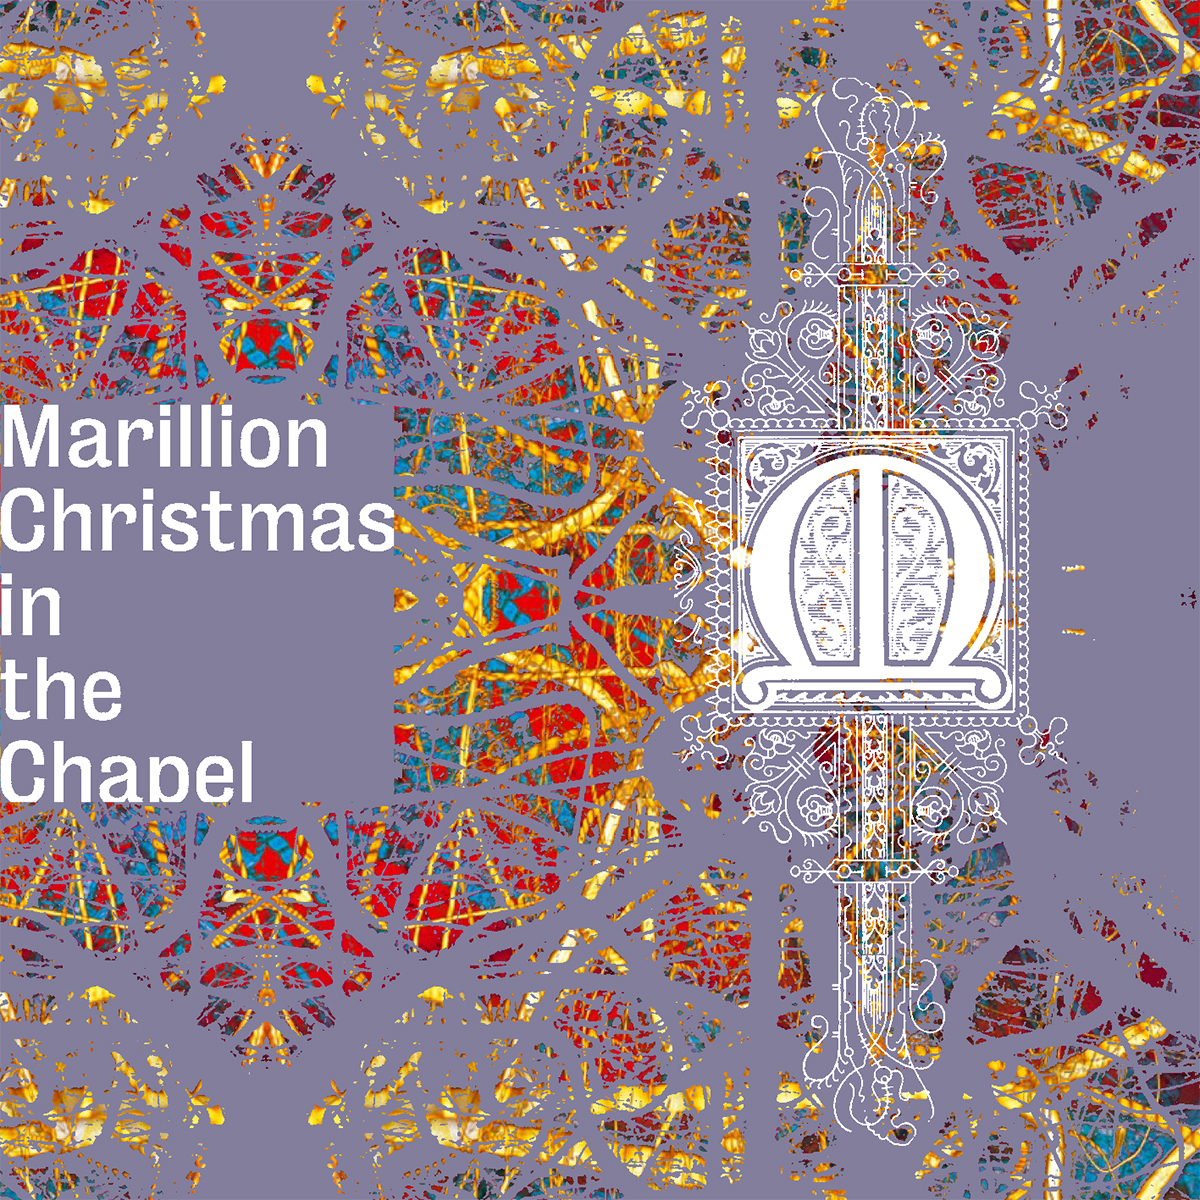 Christmas in the Chapel Live Album Download 256kbps